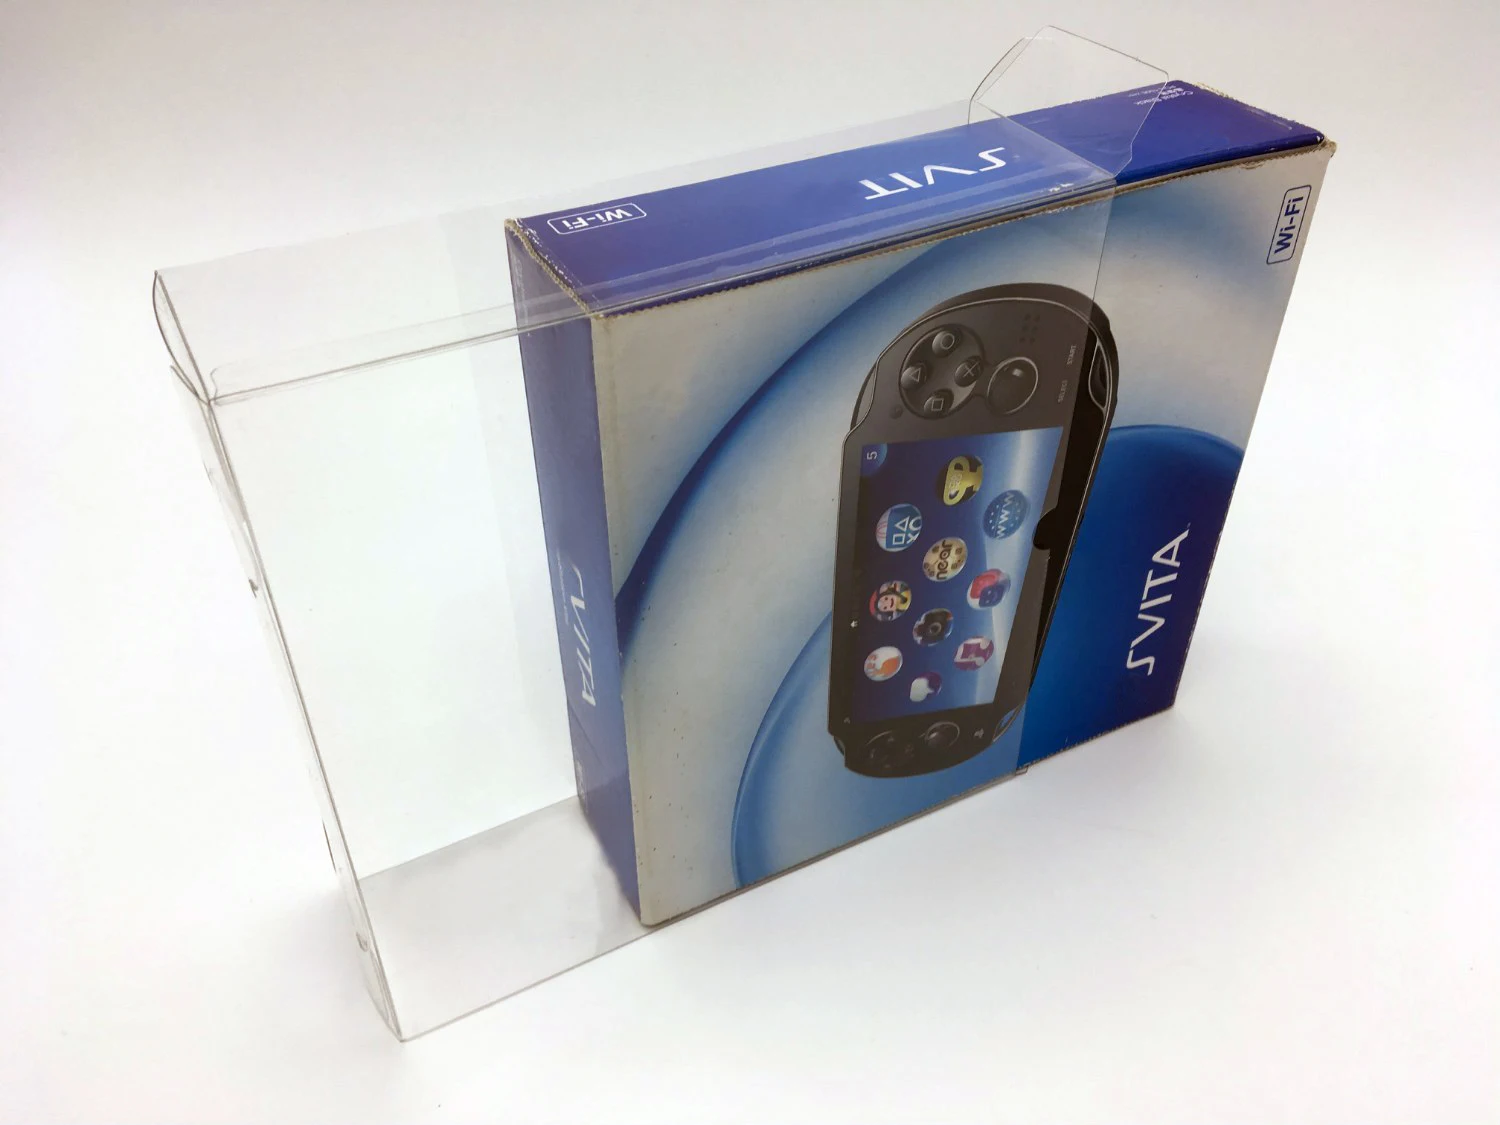 

1 Box Protector For PS VITA PSV 1000 Only EU Clear Display Case Collect Box